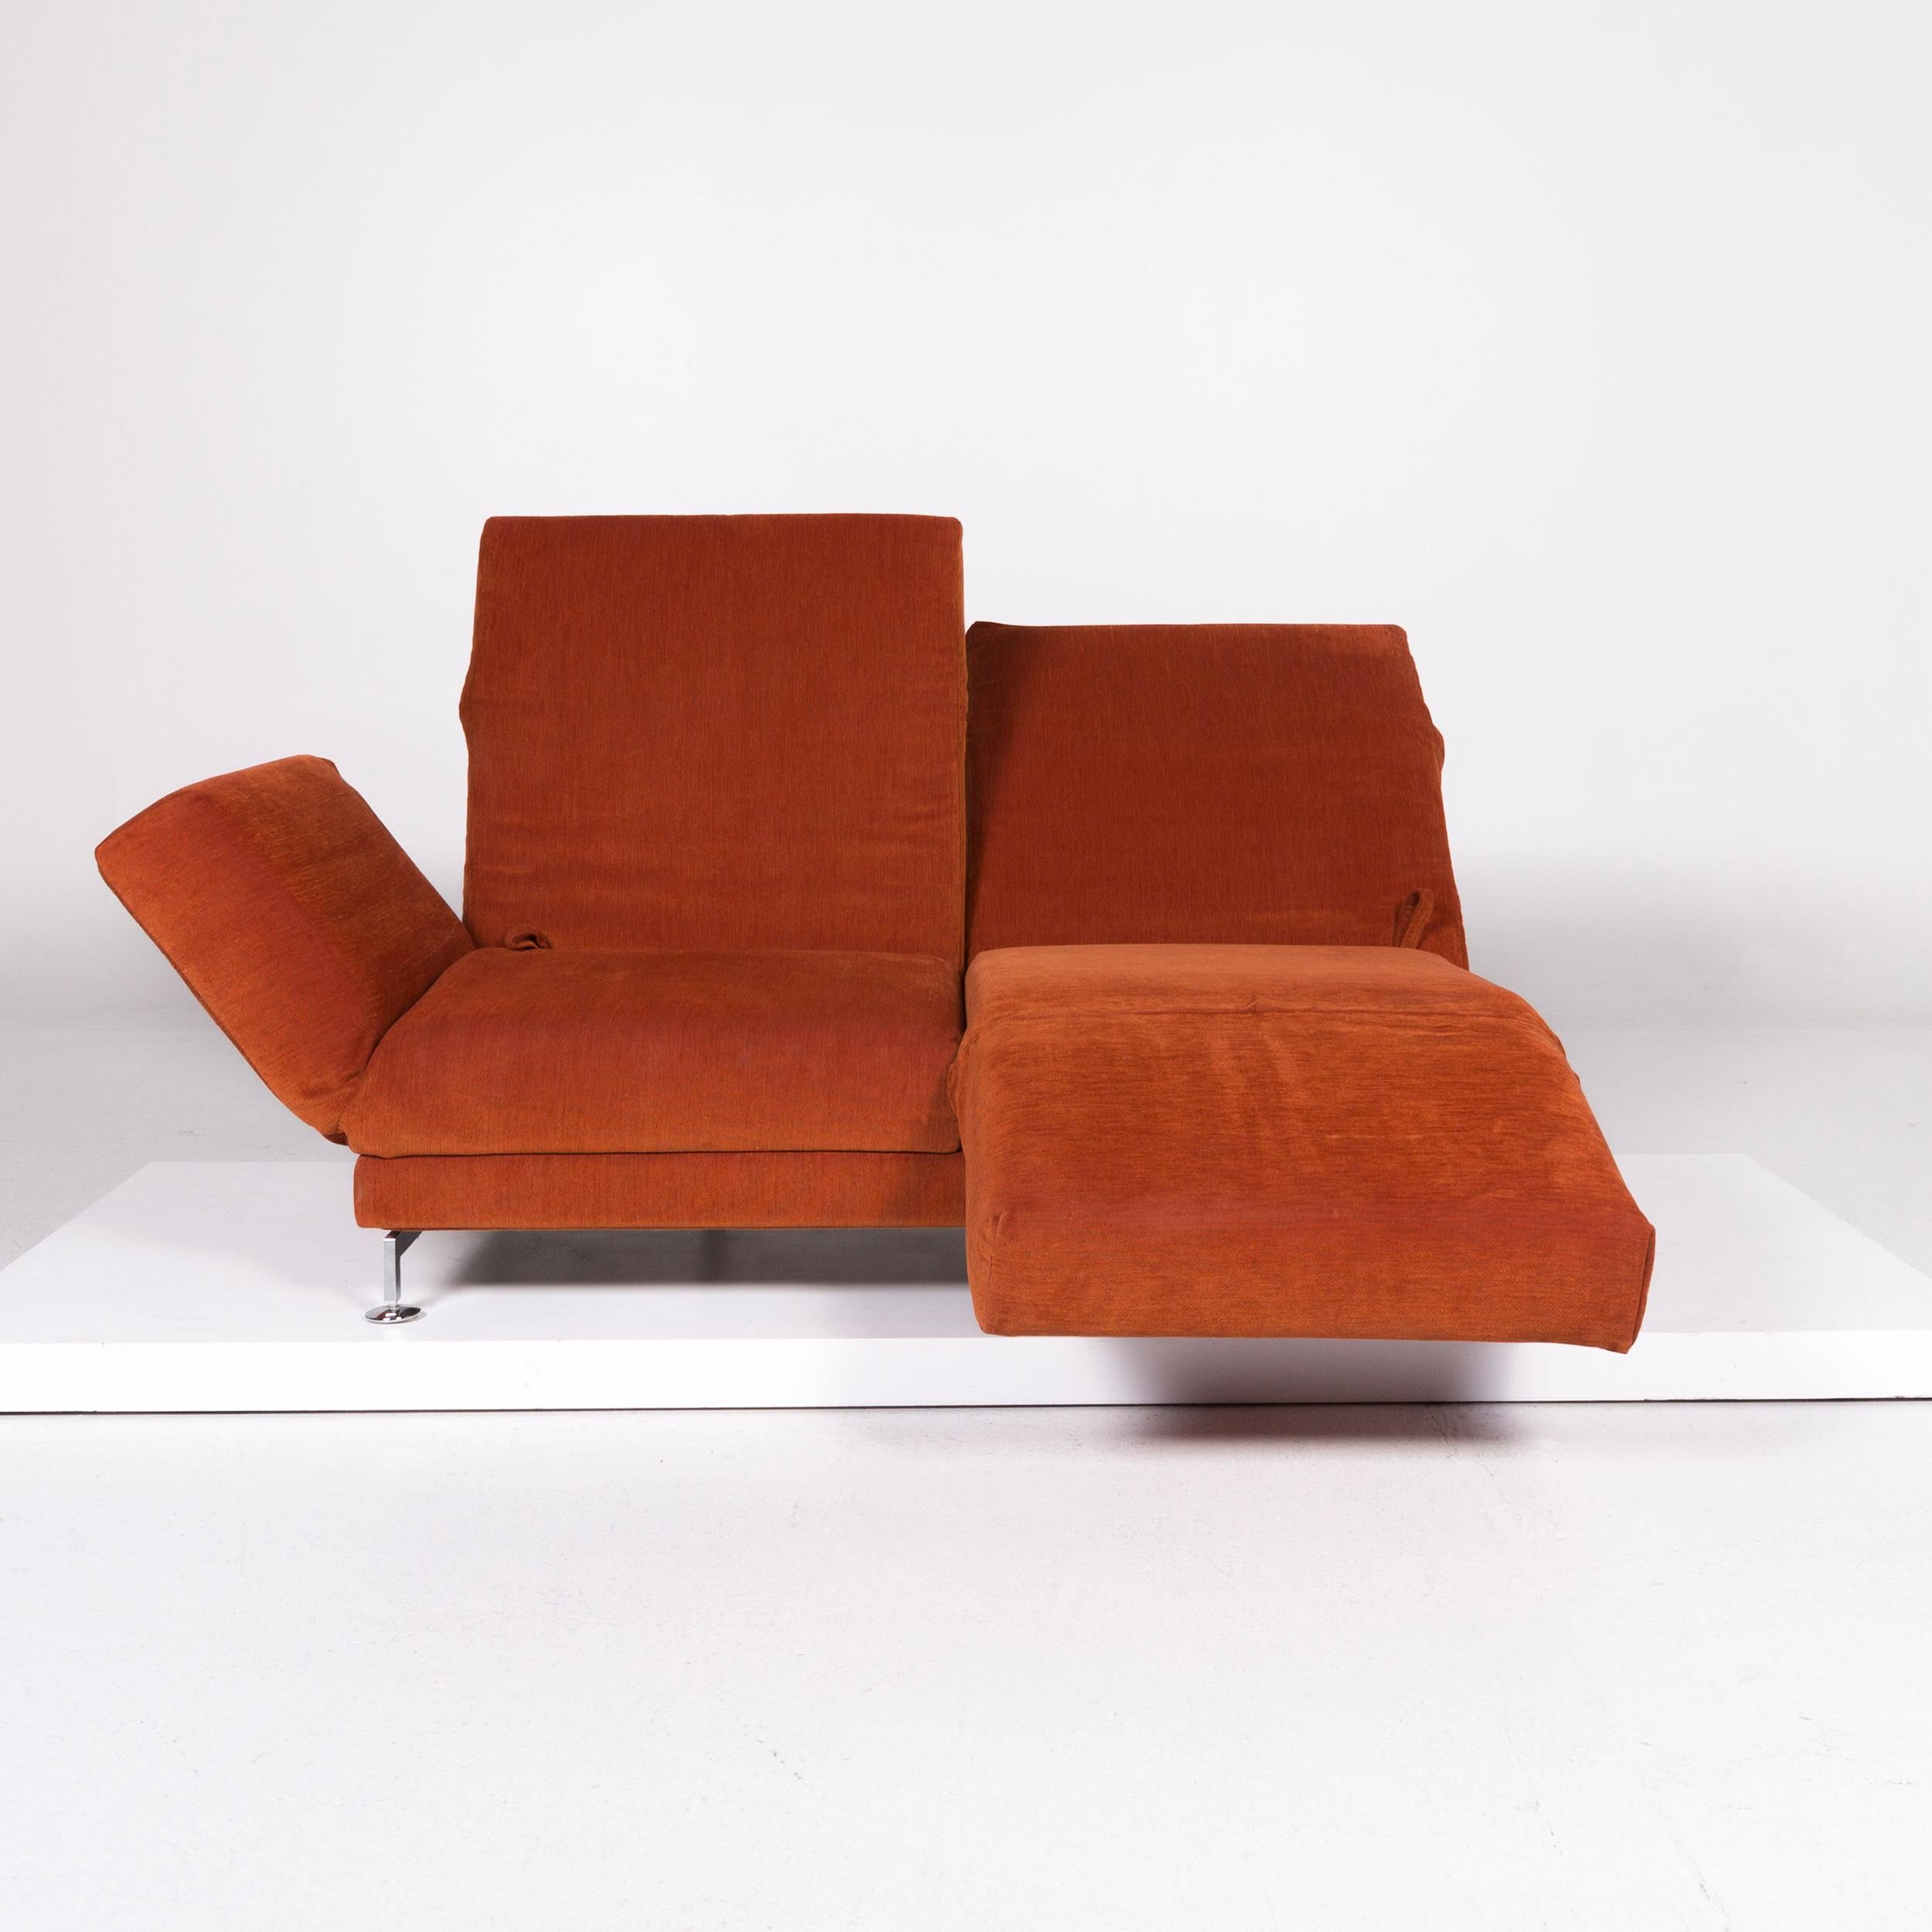 We bring to you a Brühl & Sippold Moule fabric sofa orange two-seat incl. function.

 Product measurements in centimeters:
 
Measures: Depth 95
Width 185
Height 45
Seat-height 40
Rest-height 40
Seat-depth 55
Seat-width 140
Back-height